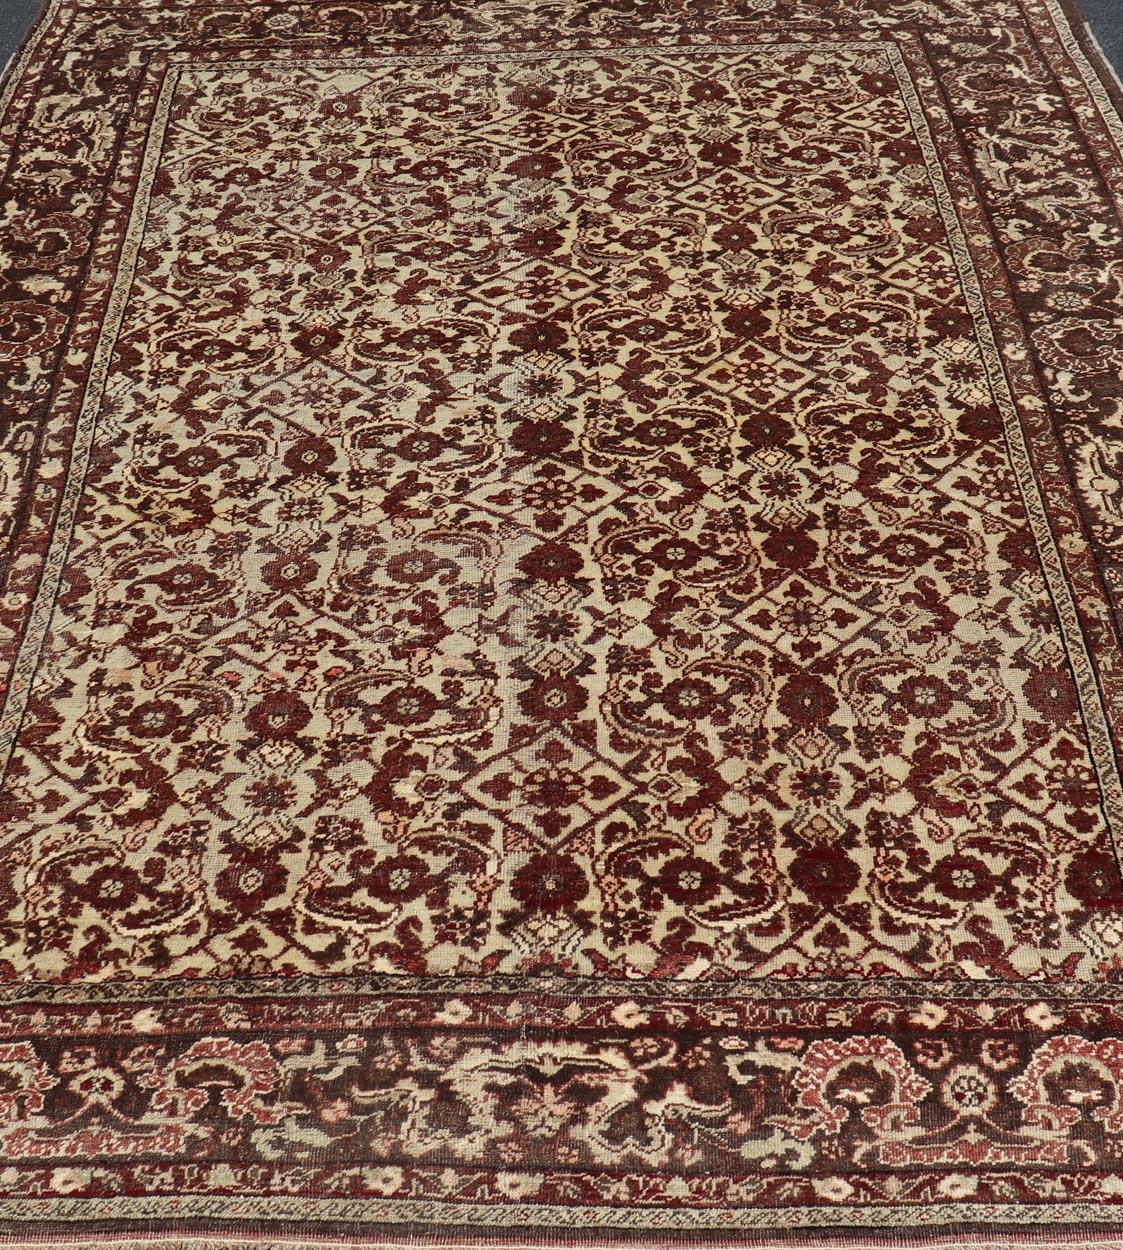 Wool Antique Turkish Sivas Rug with Tan Background and Maroon, Eggplant, Brown Color  For Sale